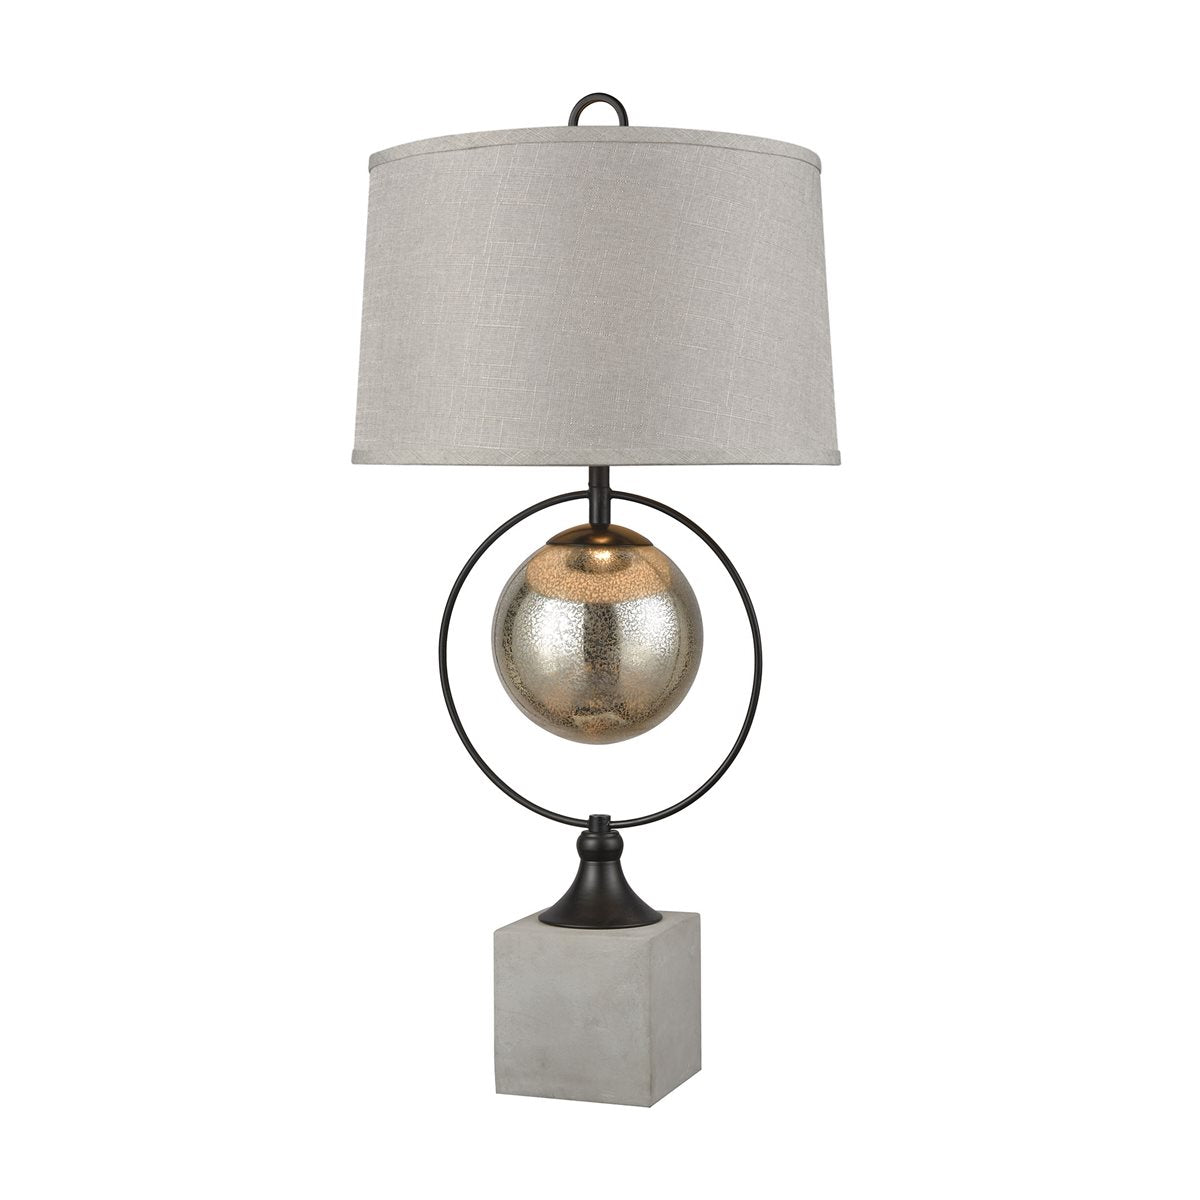 Stein World Front Royal Table Lamp 77081